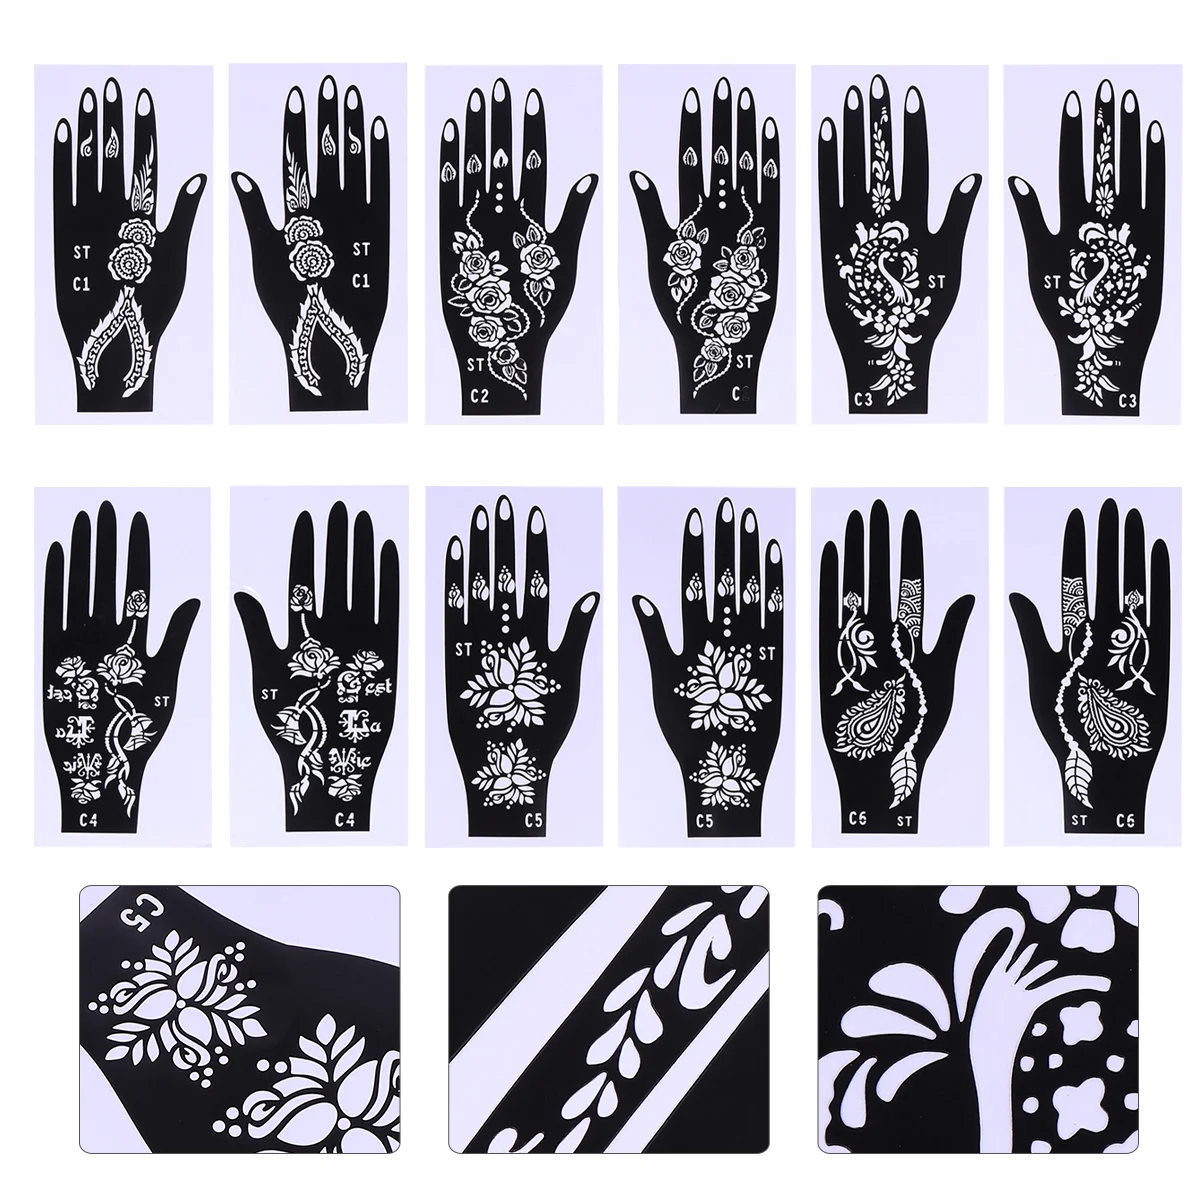 

6 Sheets Hand Tattoo Template DIY Tattoos Stencils Adults Makeup Stickers Painting Drawing Airbrush Hollow Out